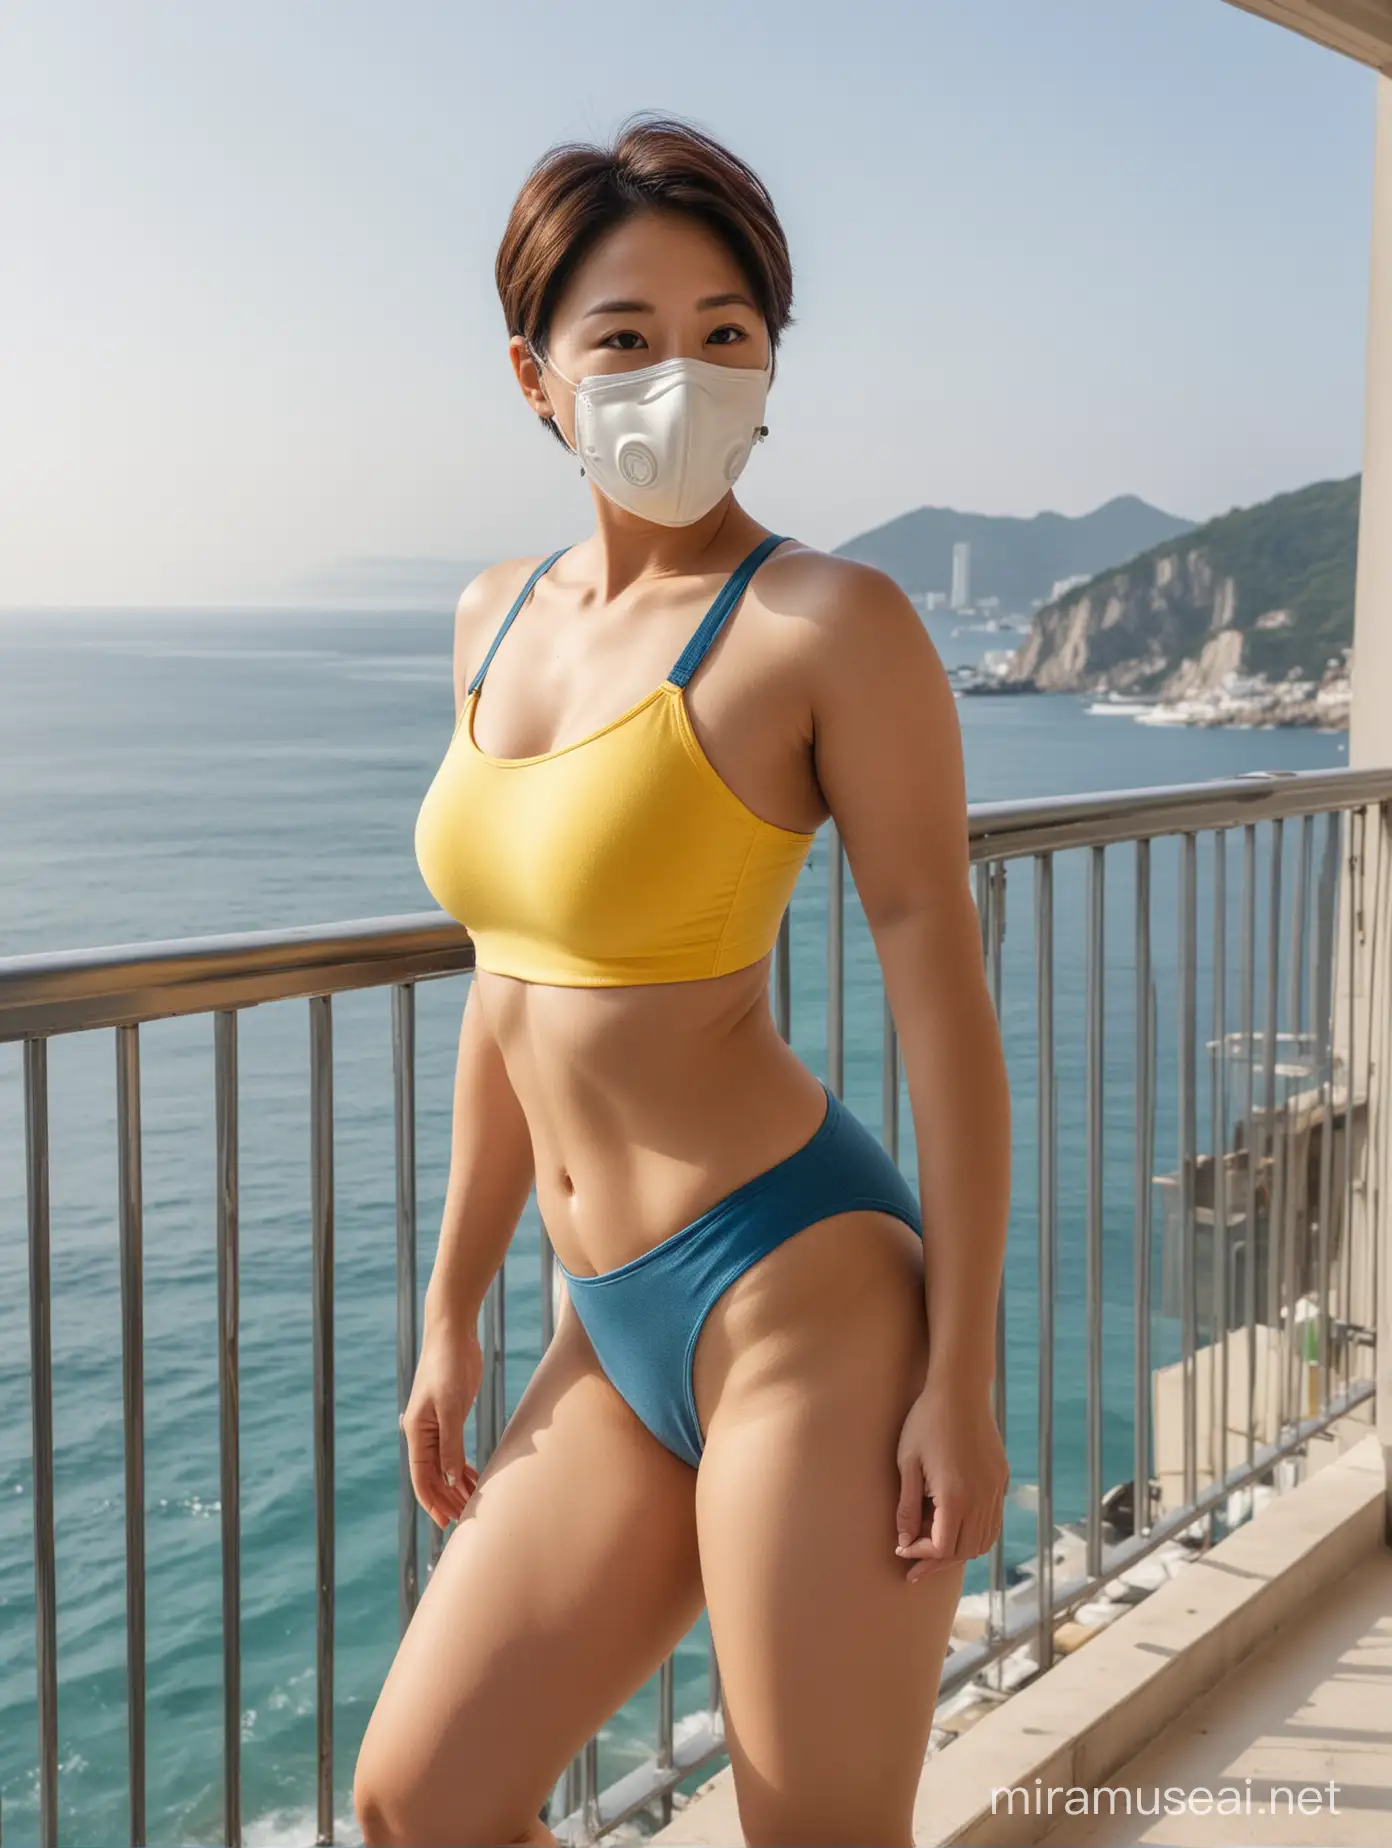 Attractive Korean Woman in Respirator Mask Poses on Balcony by the Sea